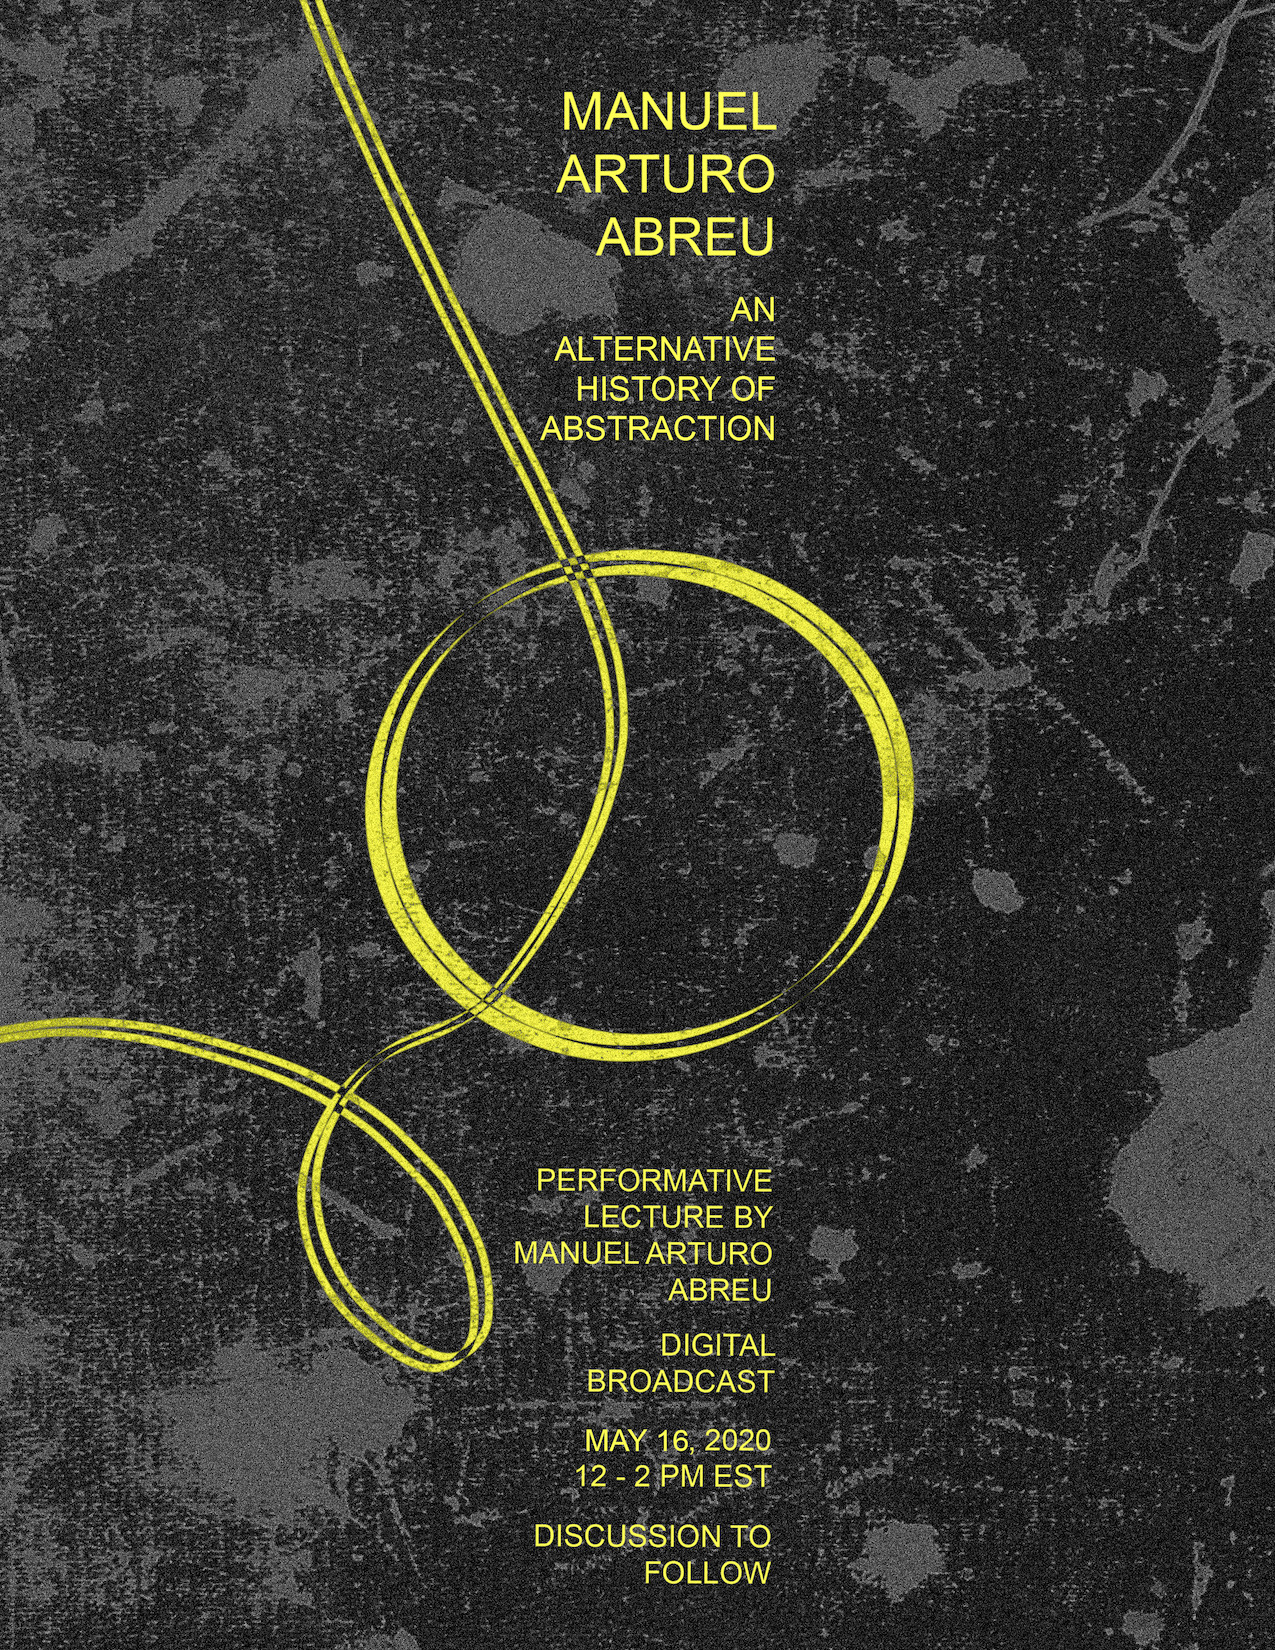 An Alternative History of Abstraction by manuel arturo abreu